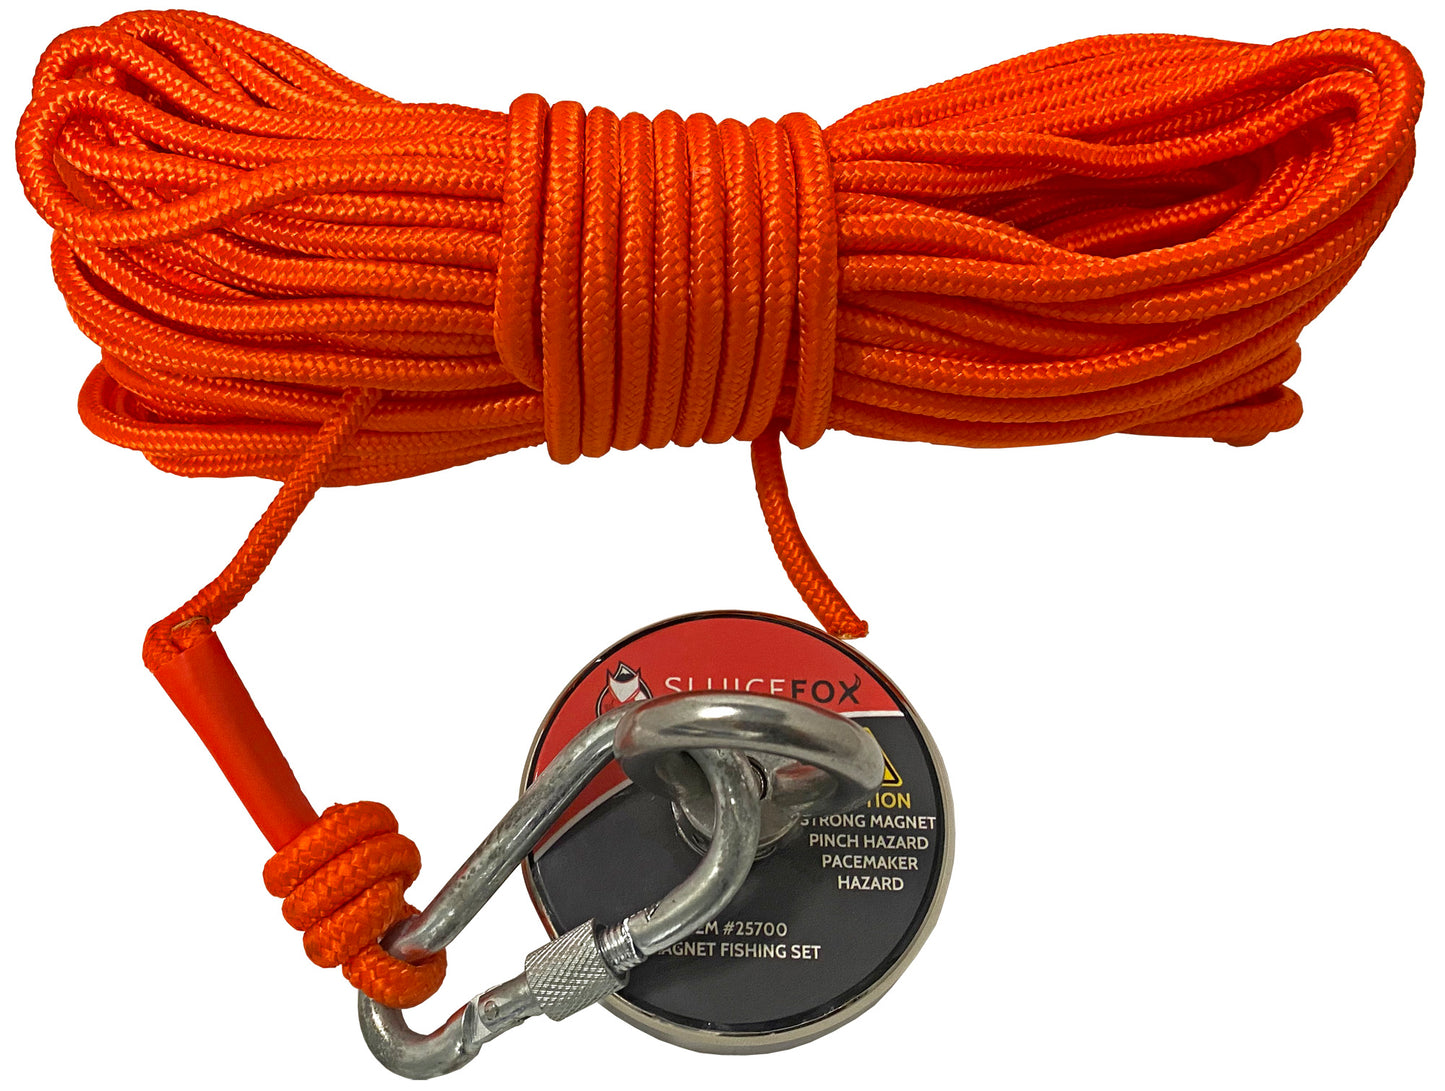 Sluice Fox magnet fishing kit; strong 550 pound capacity directional magnet with 65 foot rope and carabiner; magnetic fishing kit with heavy duty magnets